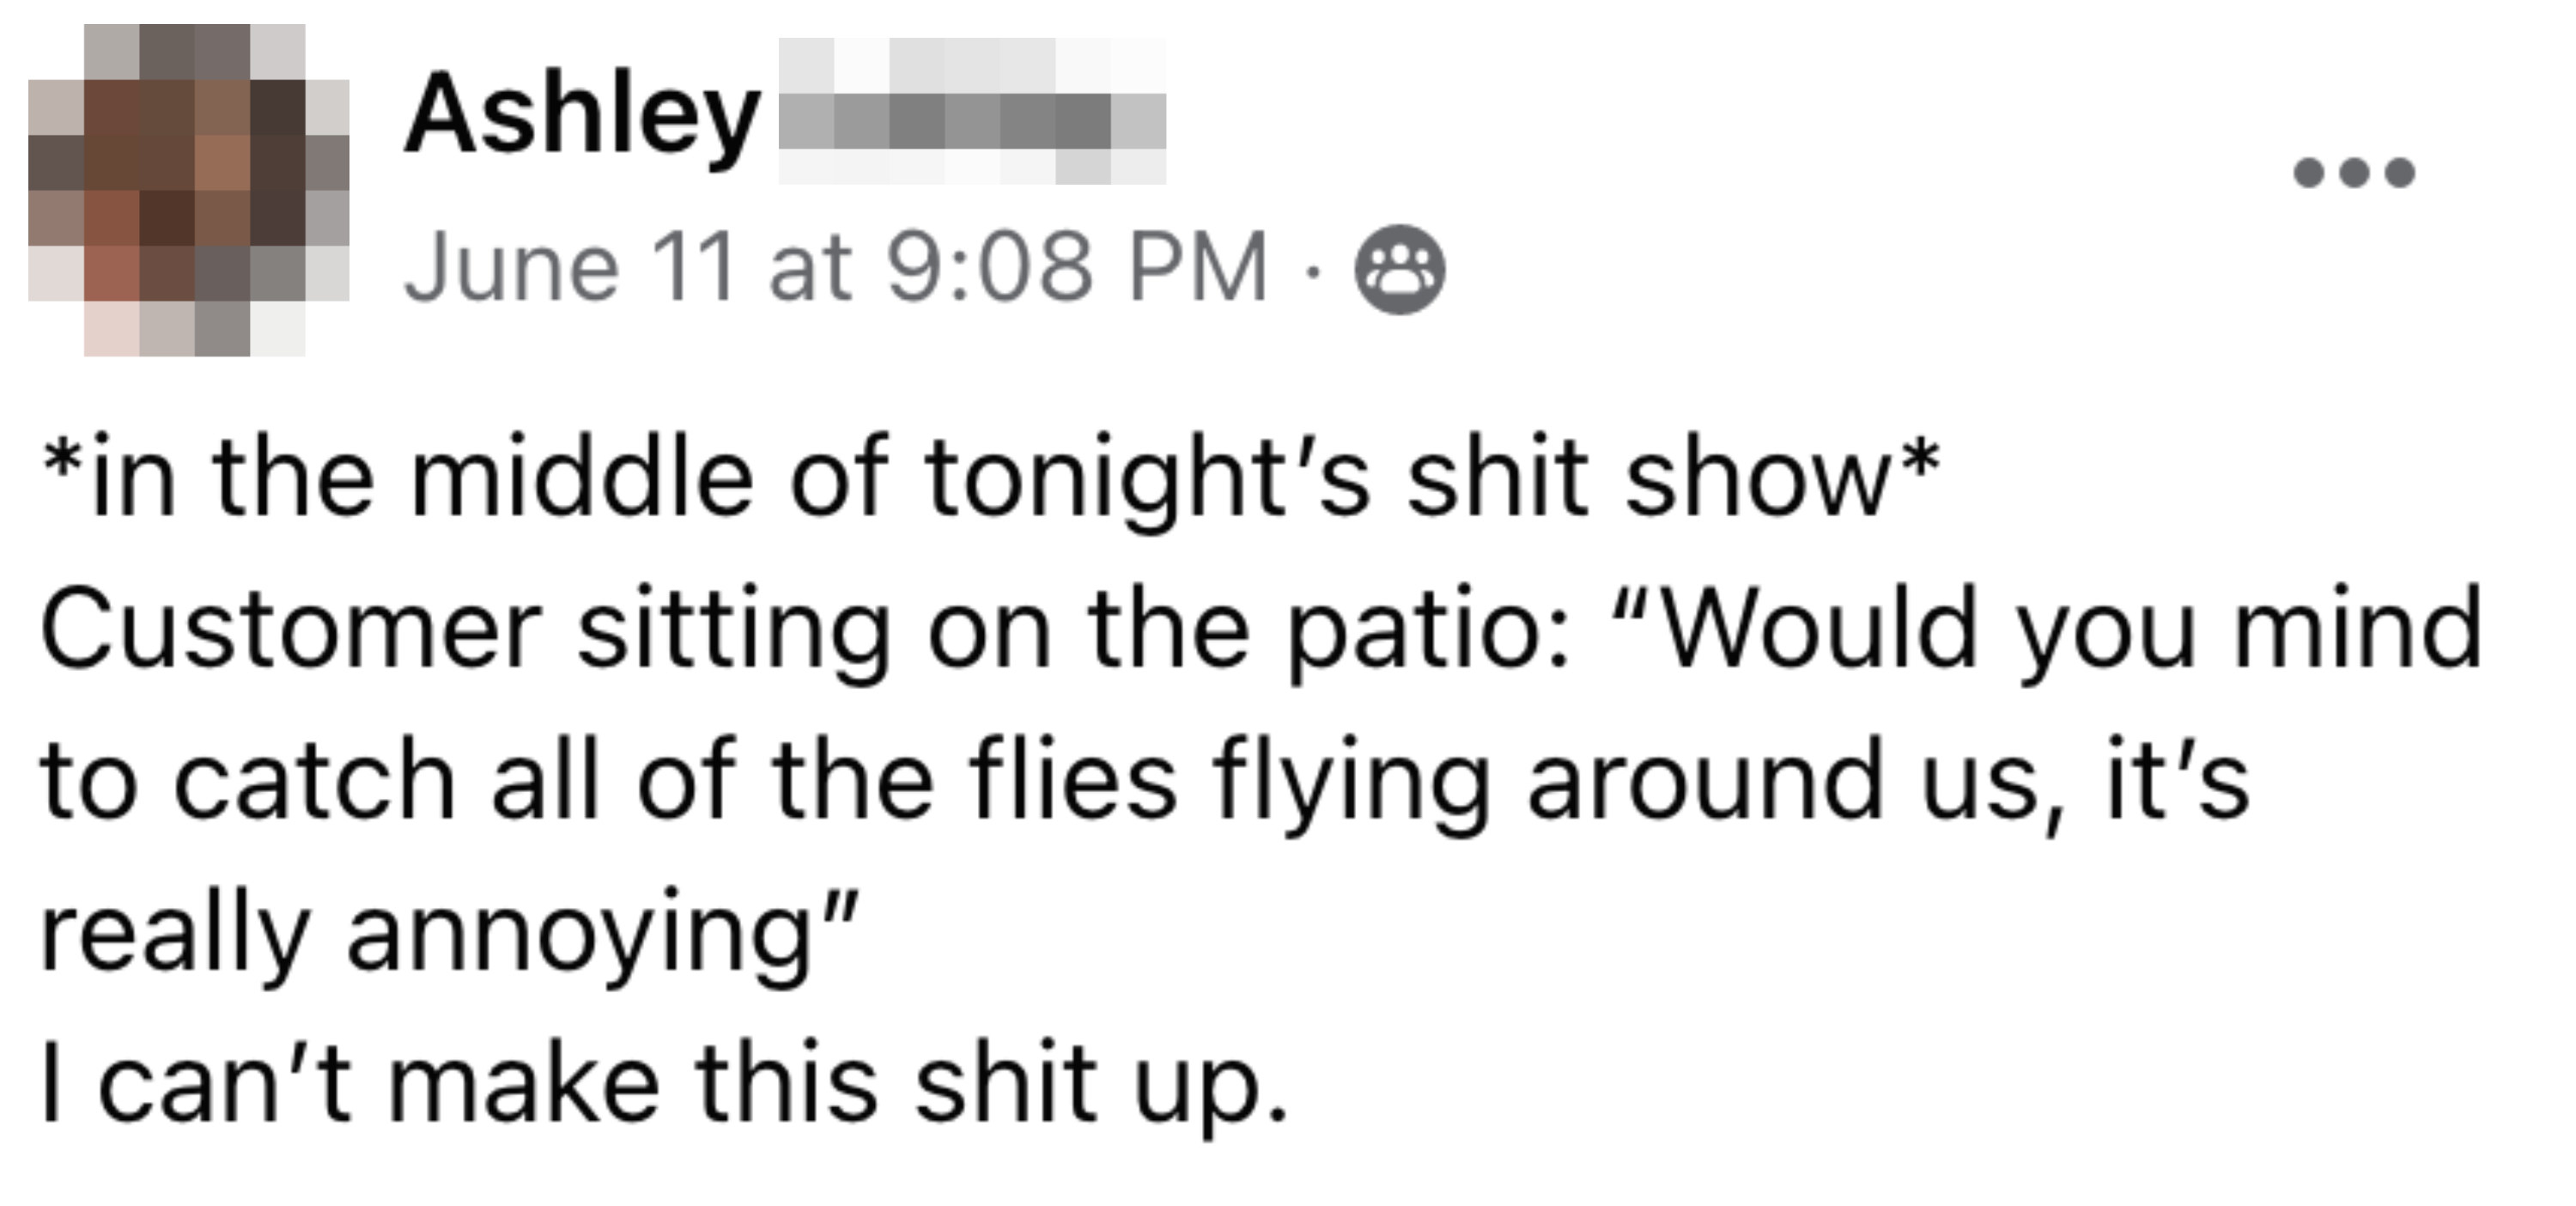 customer asks a server to kill all the flies around them